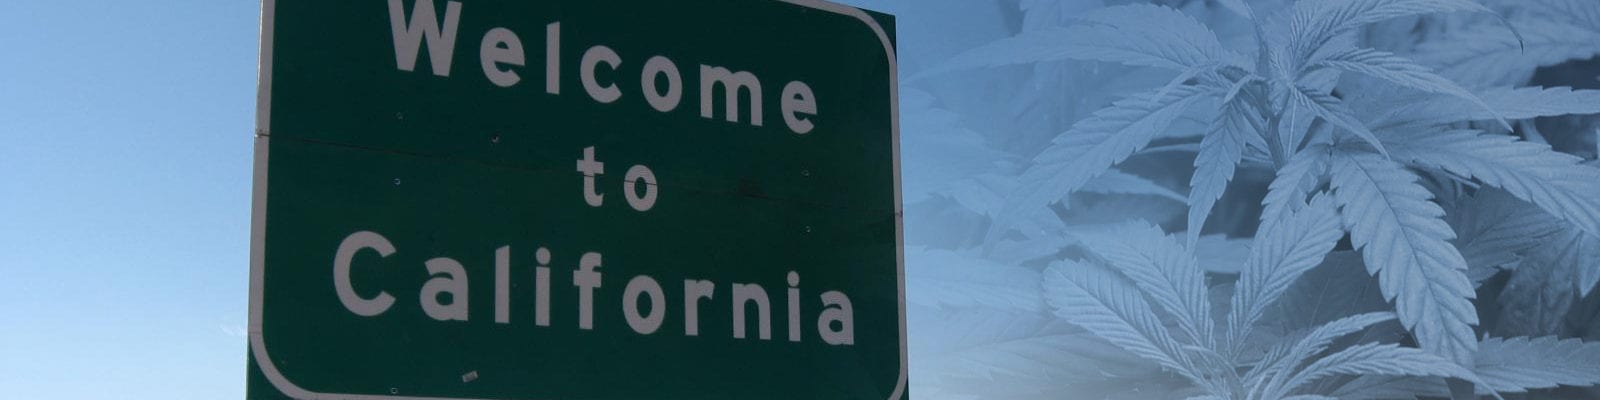 A roadside highway sign welcoming drivers to the state of California.